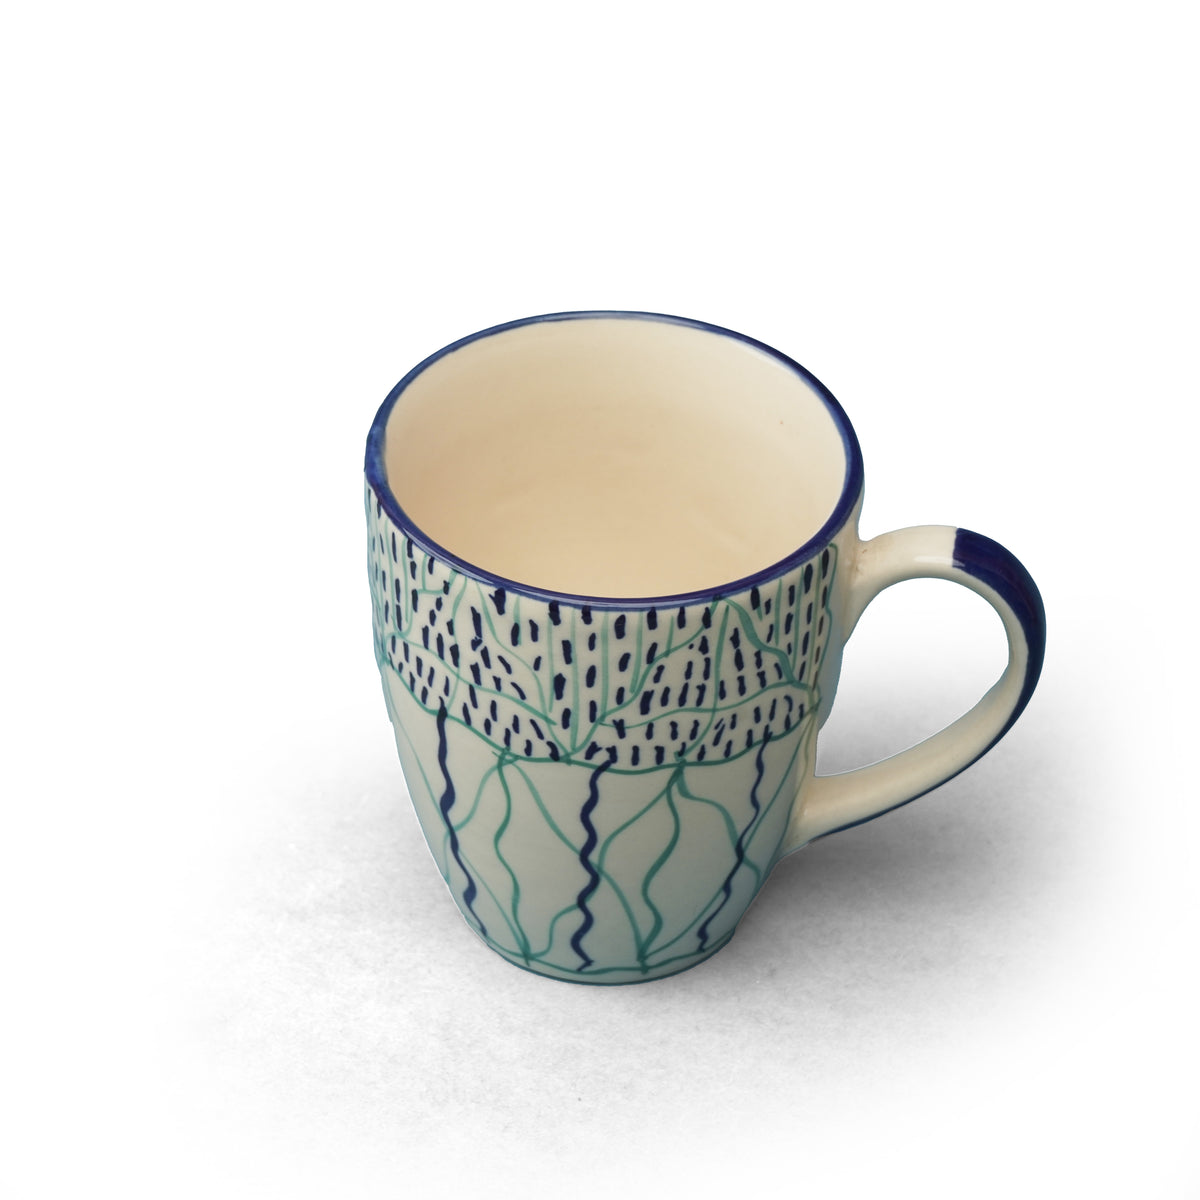 Claymistry Ceramic Mug Combo | Set of 2 | White with handpainted green and blue design | Coffee Mugs | Ceramic Combos | Tea Kettles | 13*9*10.5 cms | Glossy